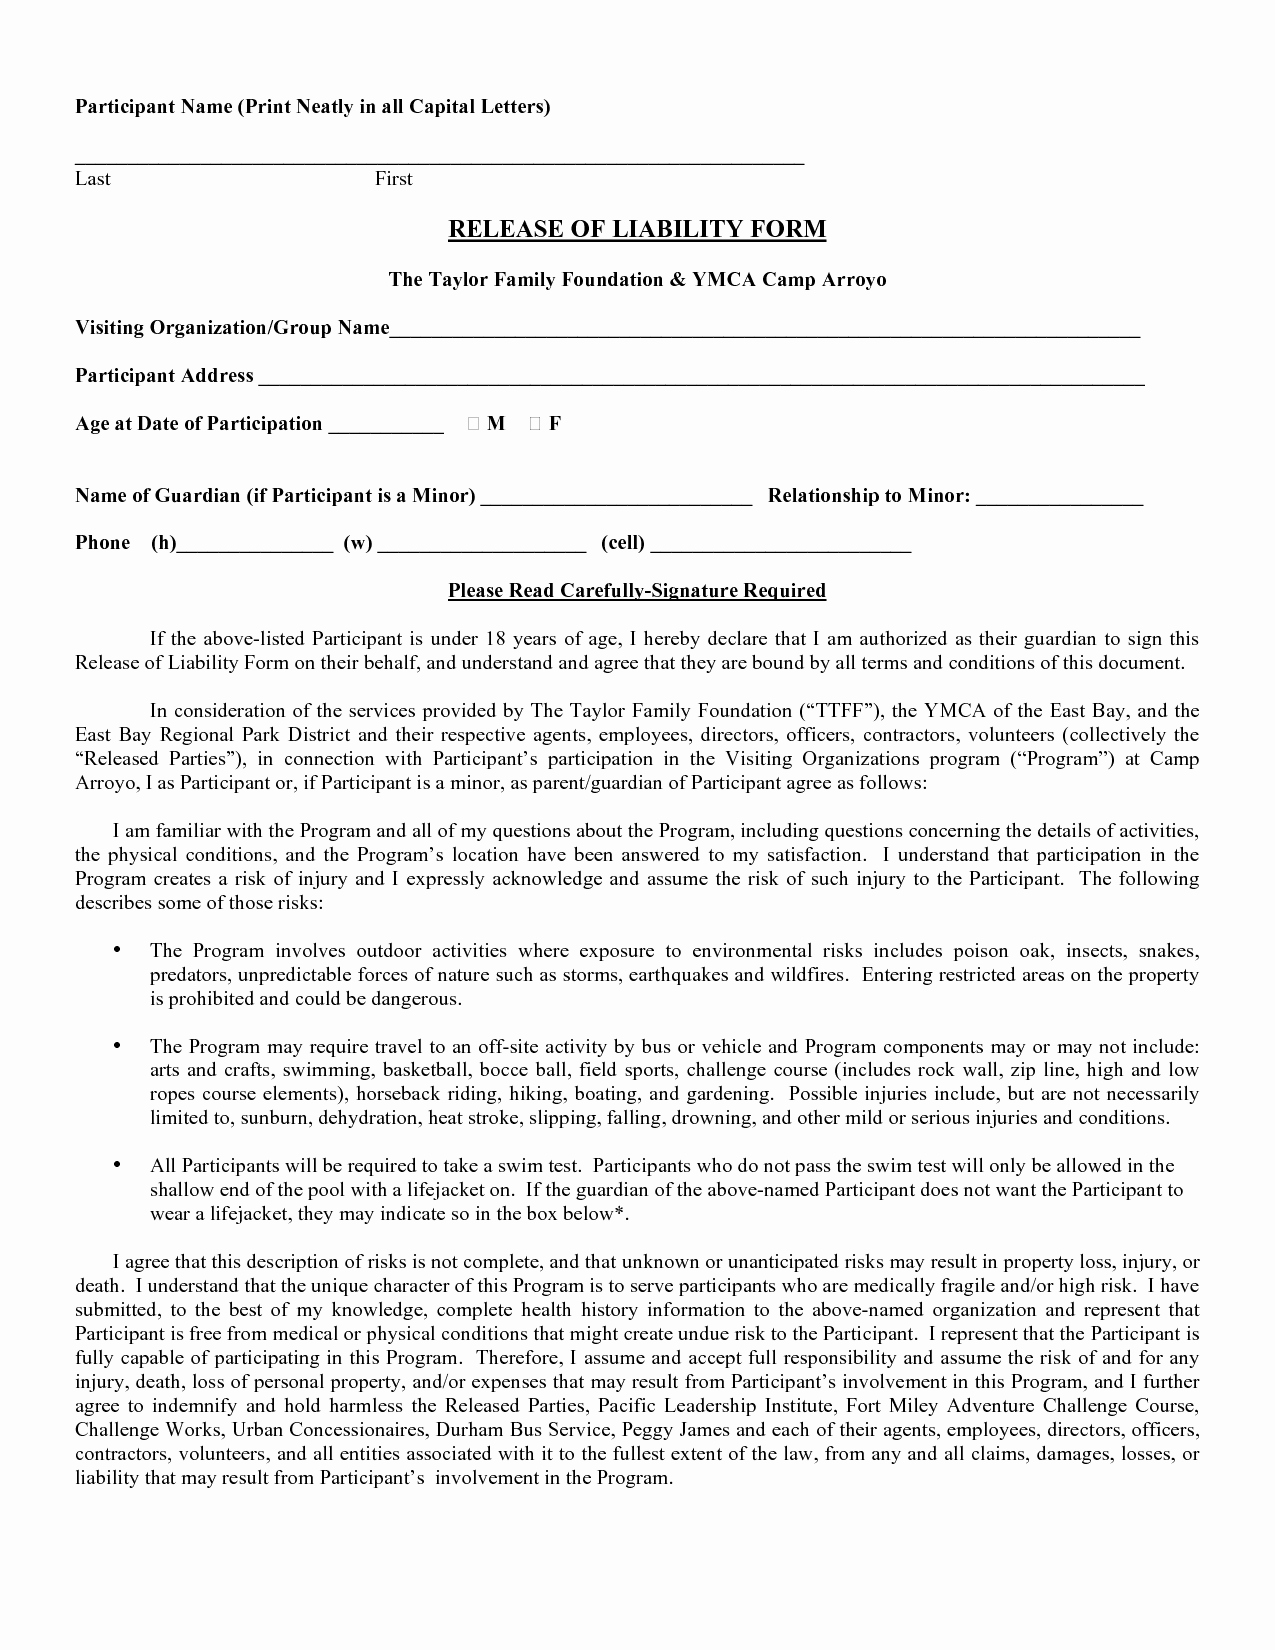 Liability Waiver form Free Luxury Free Printable Liability form form Generic